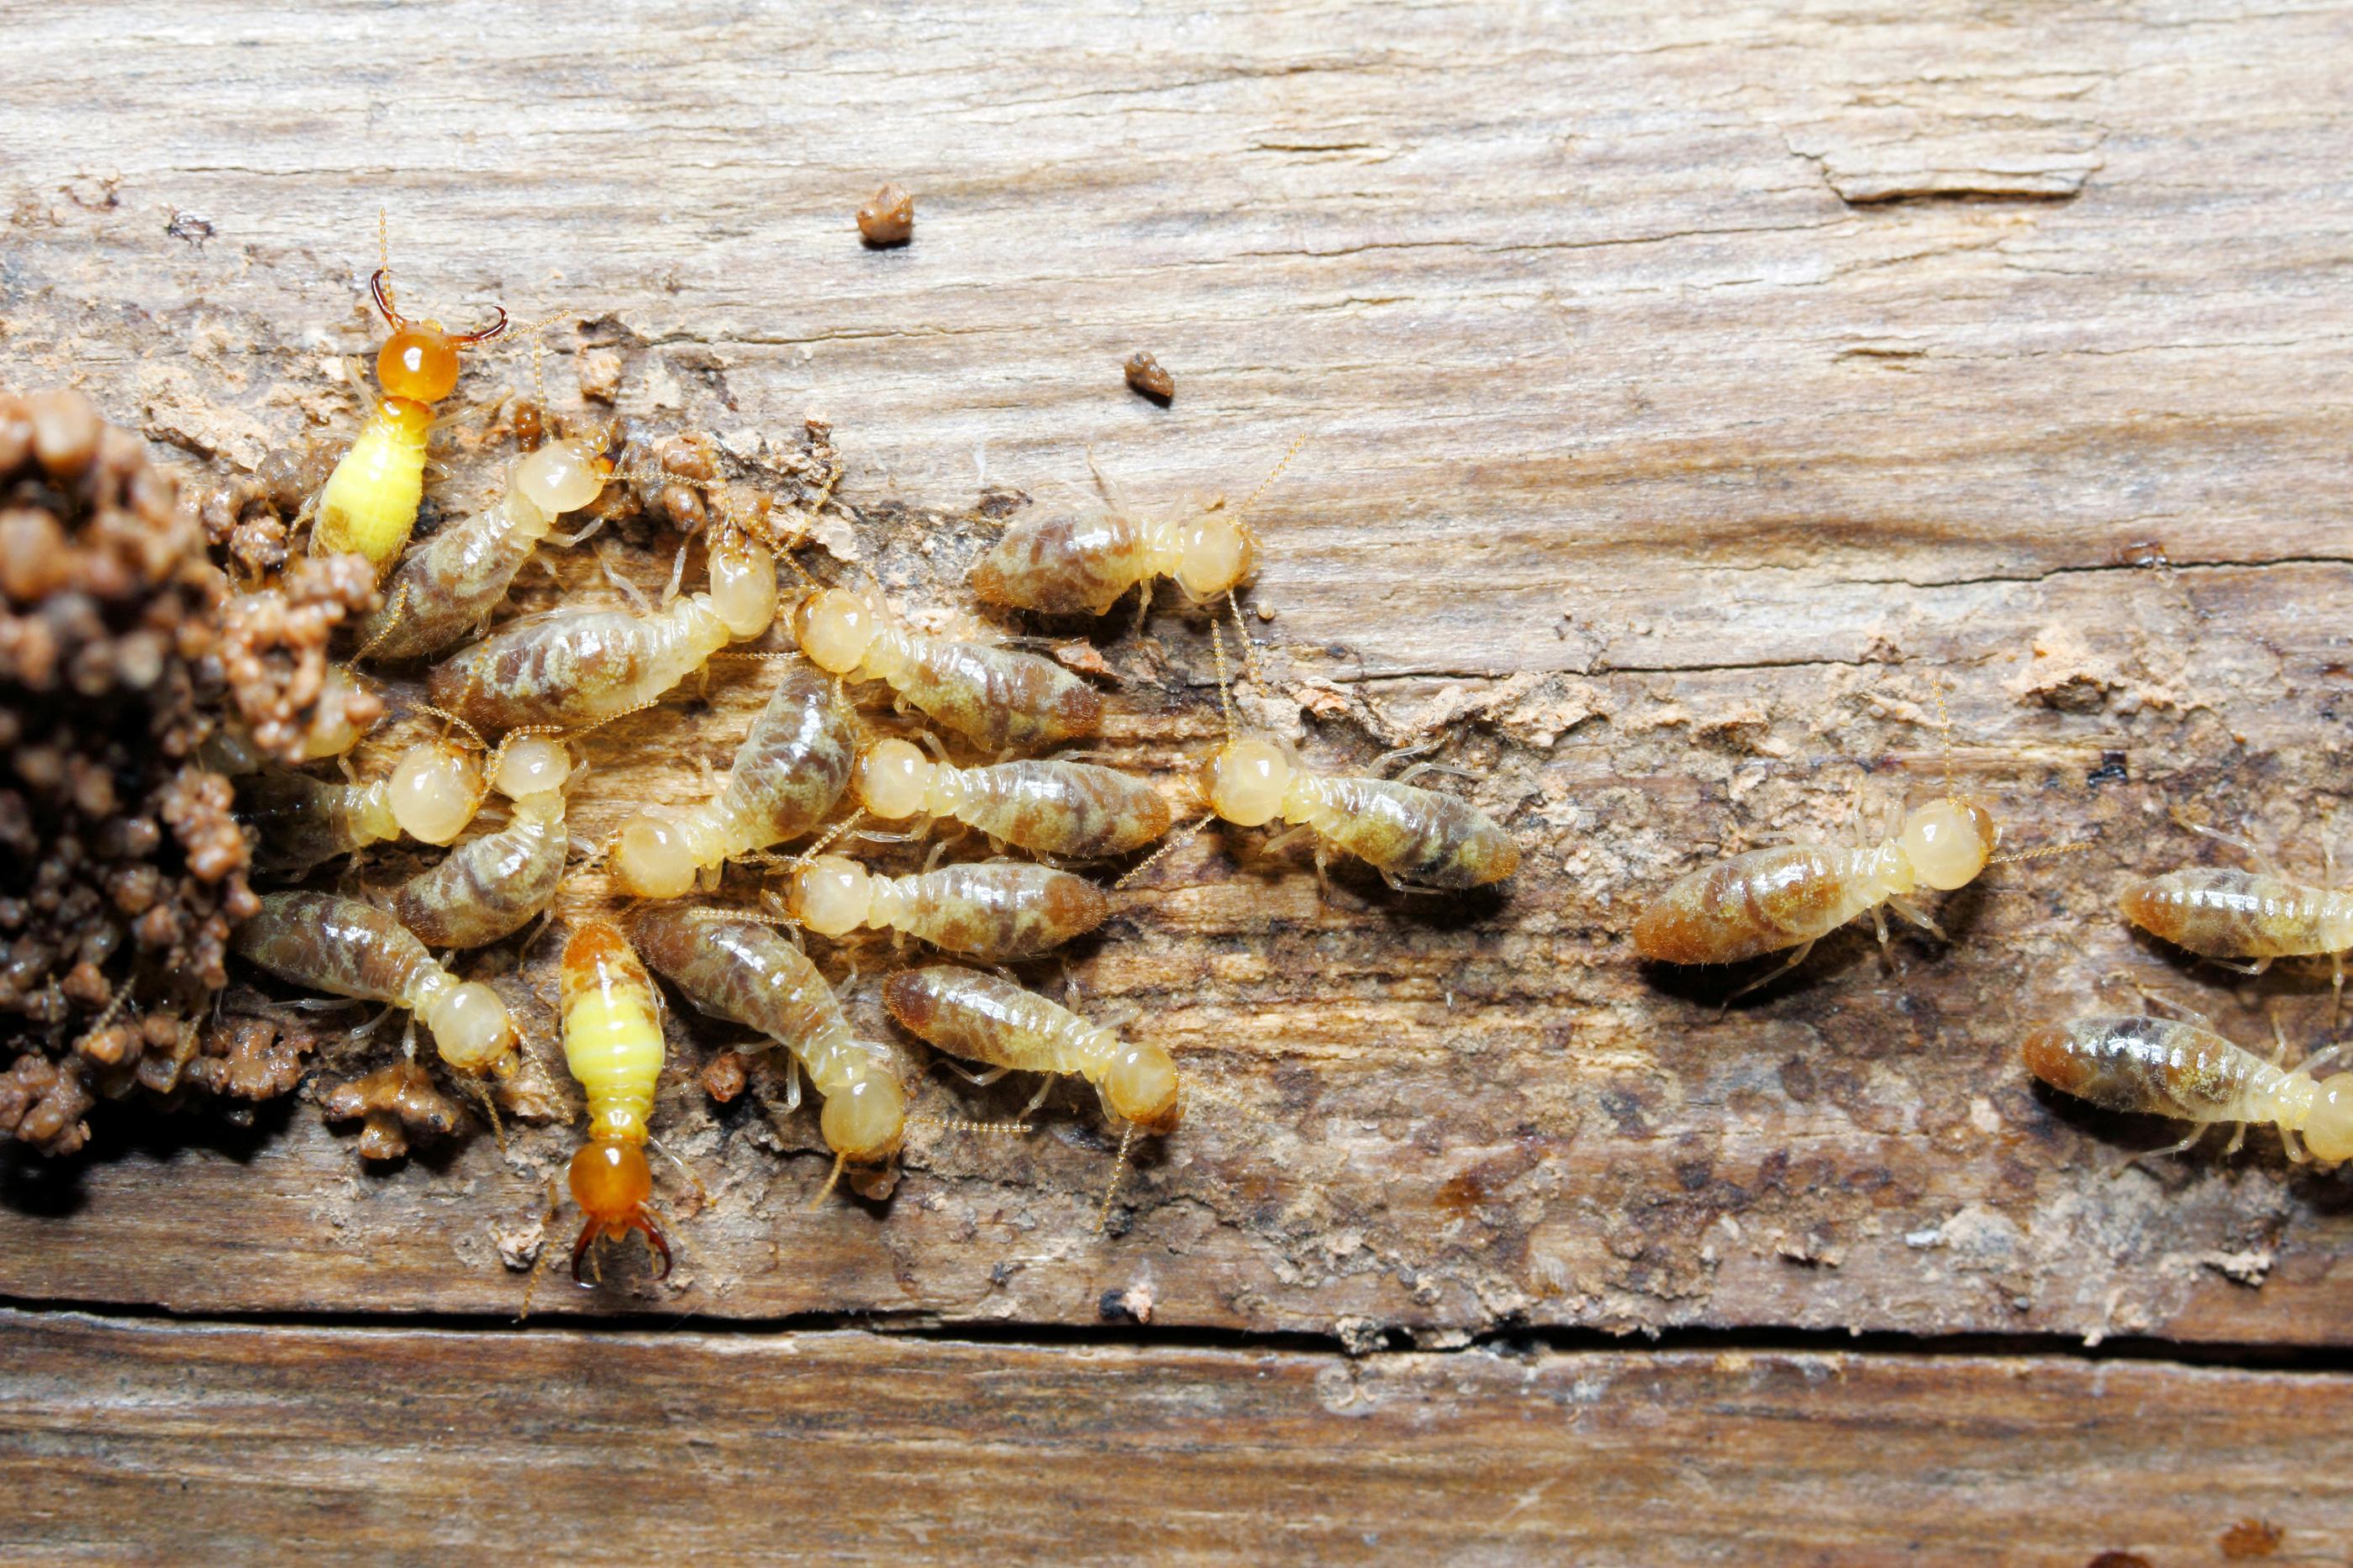 Treatment And Control Of Termites In Missouri